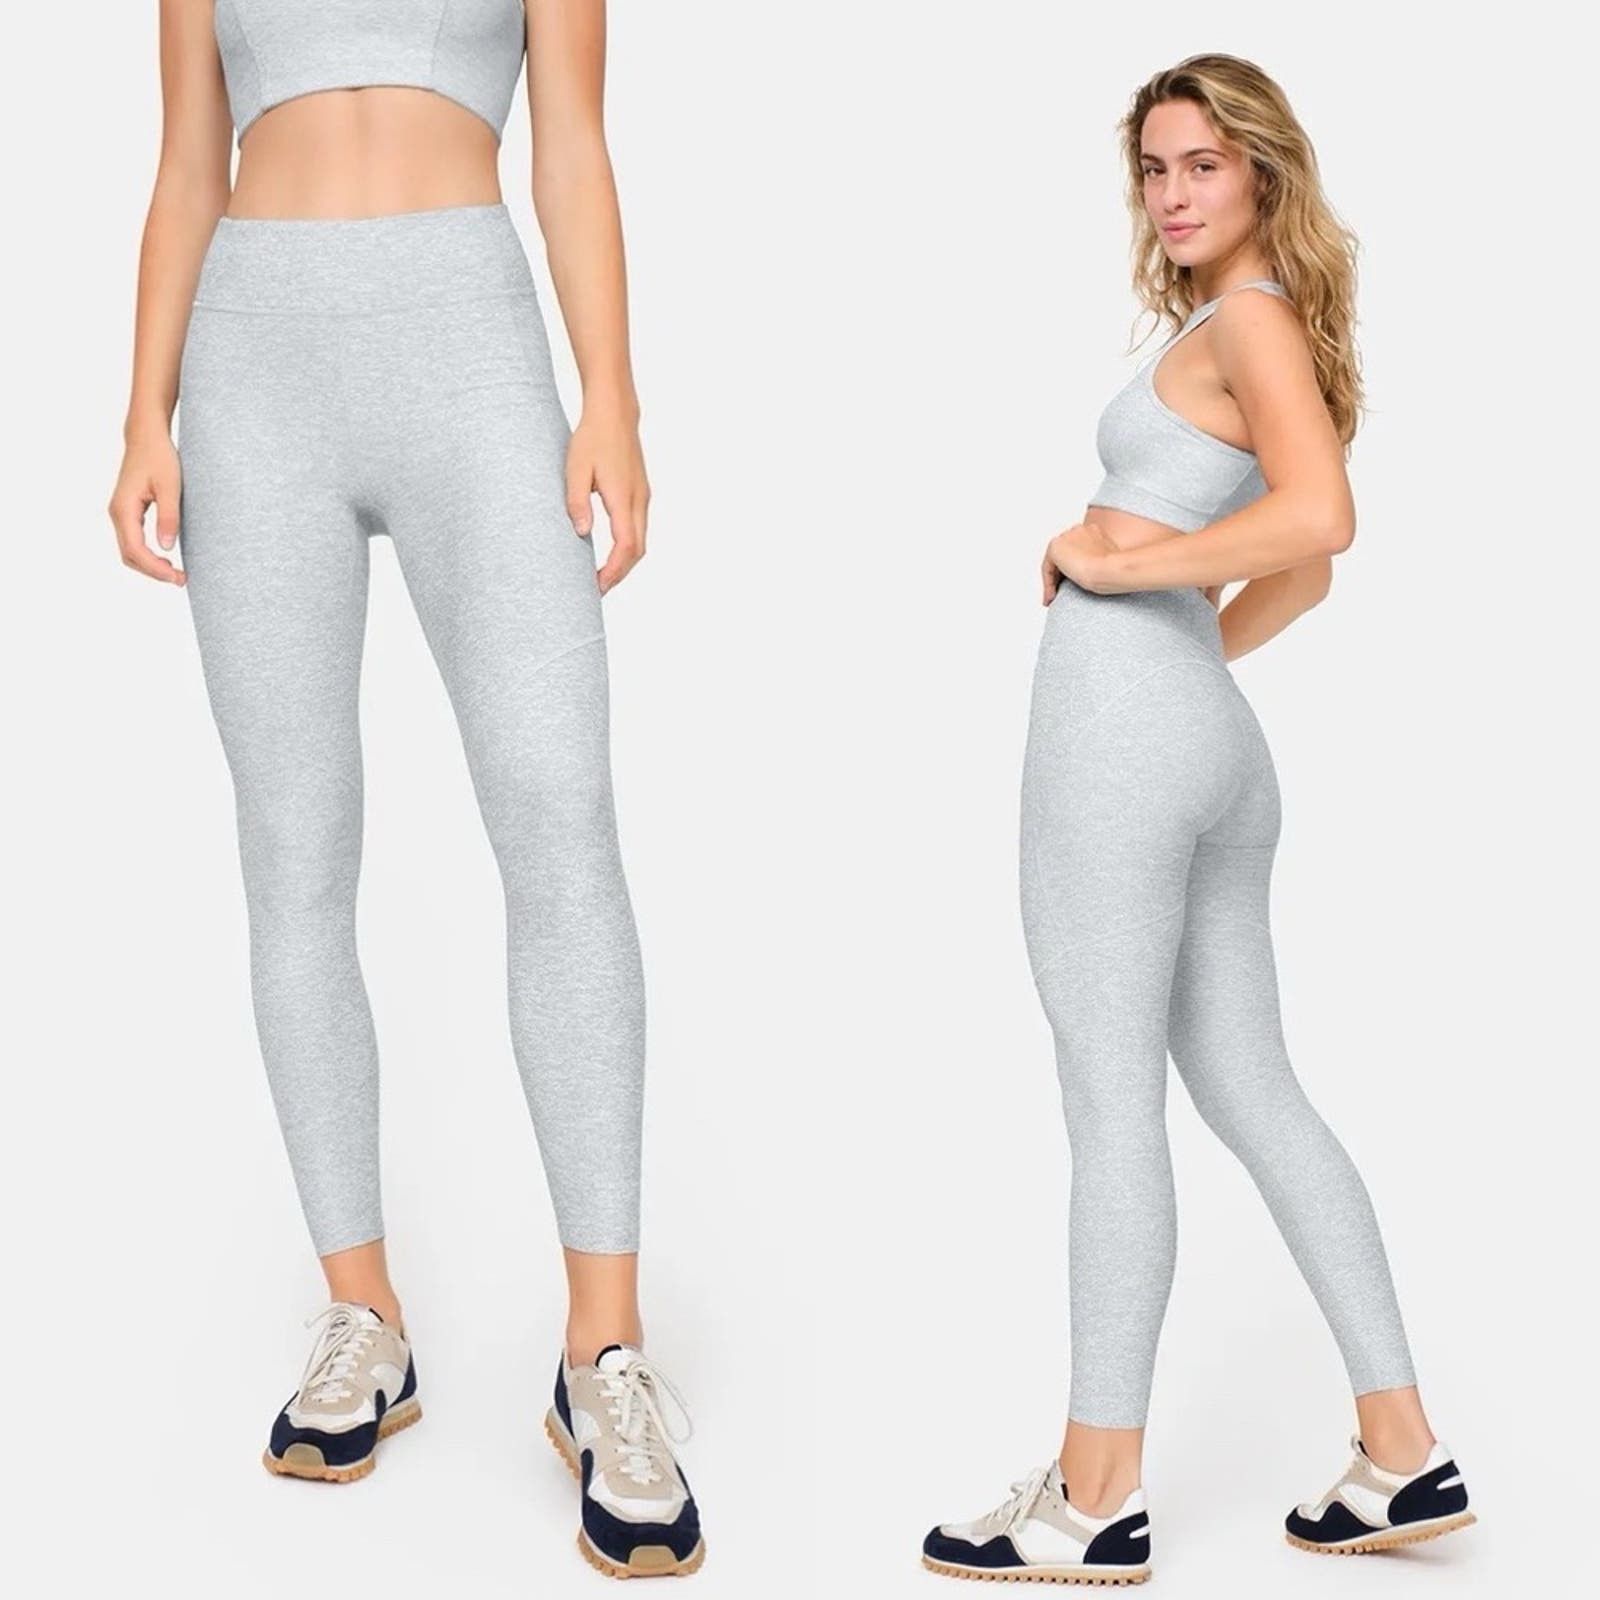 Outdoor Voices warmup 7/8 leggings light gray - women’s M